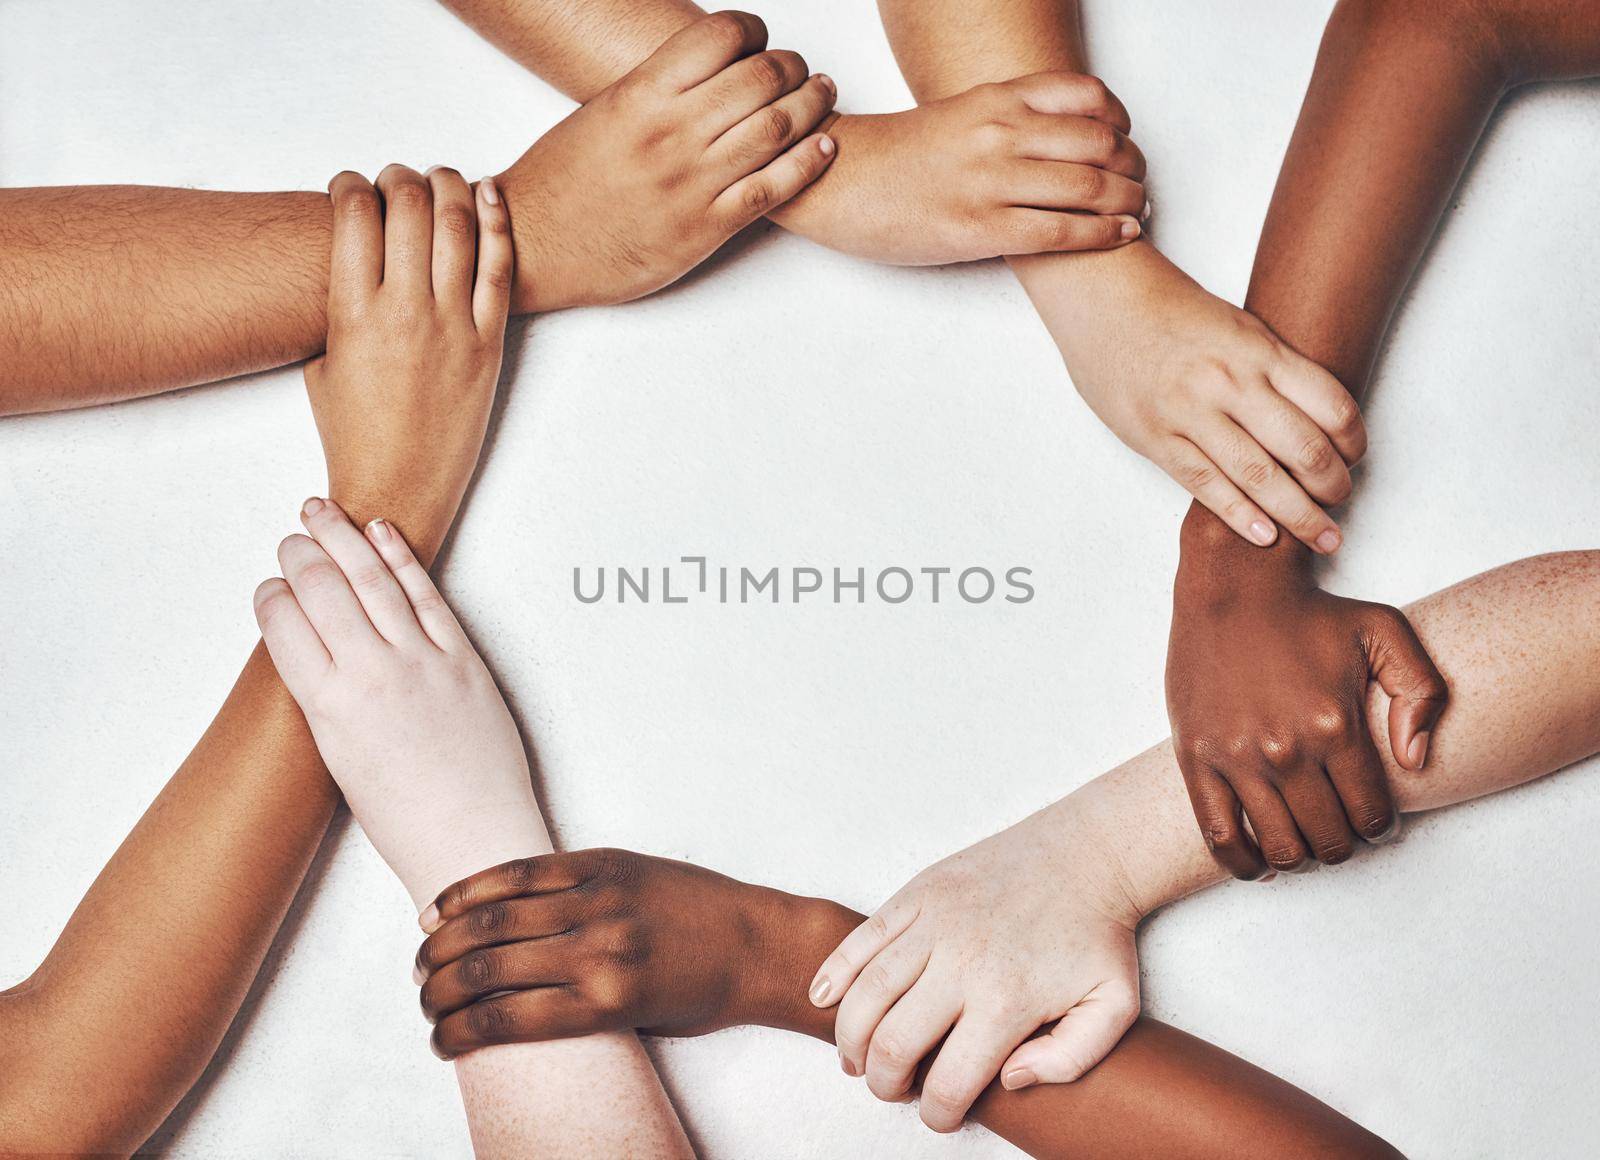 We all need a hand to hold on to. a group of hands holding on to each other against a white background